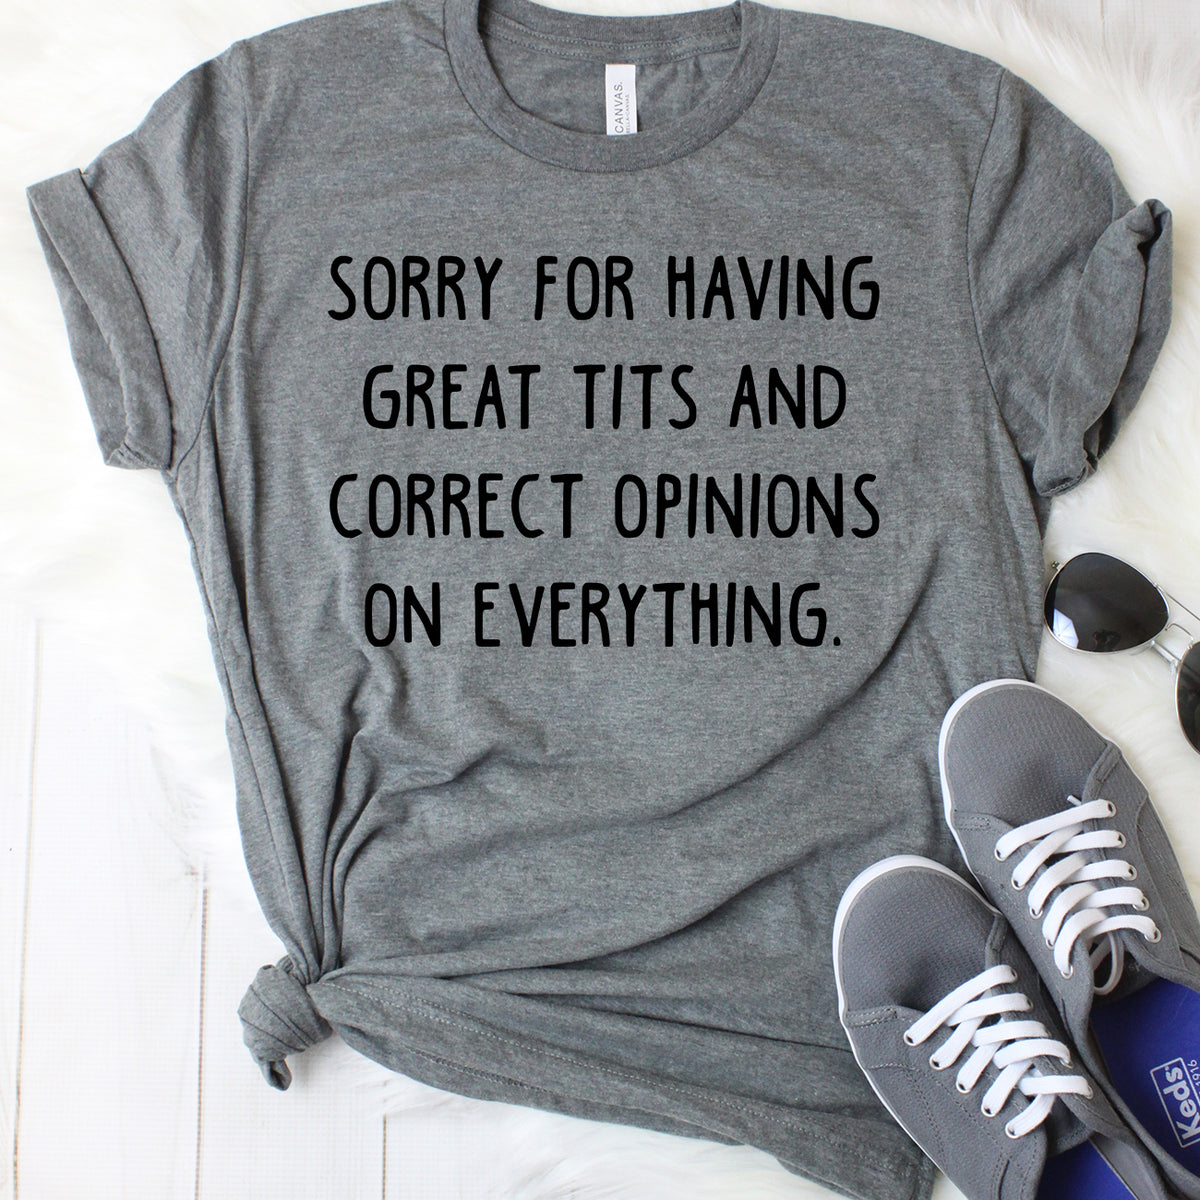 Sorry For Having Great Tits and Correct Opinions on Everything Dark Grey T-Shirt